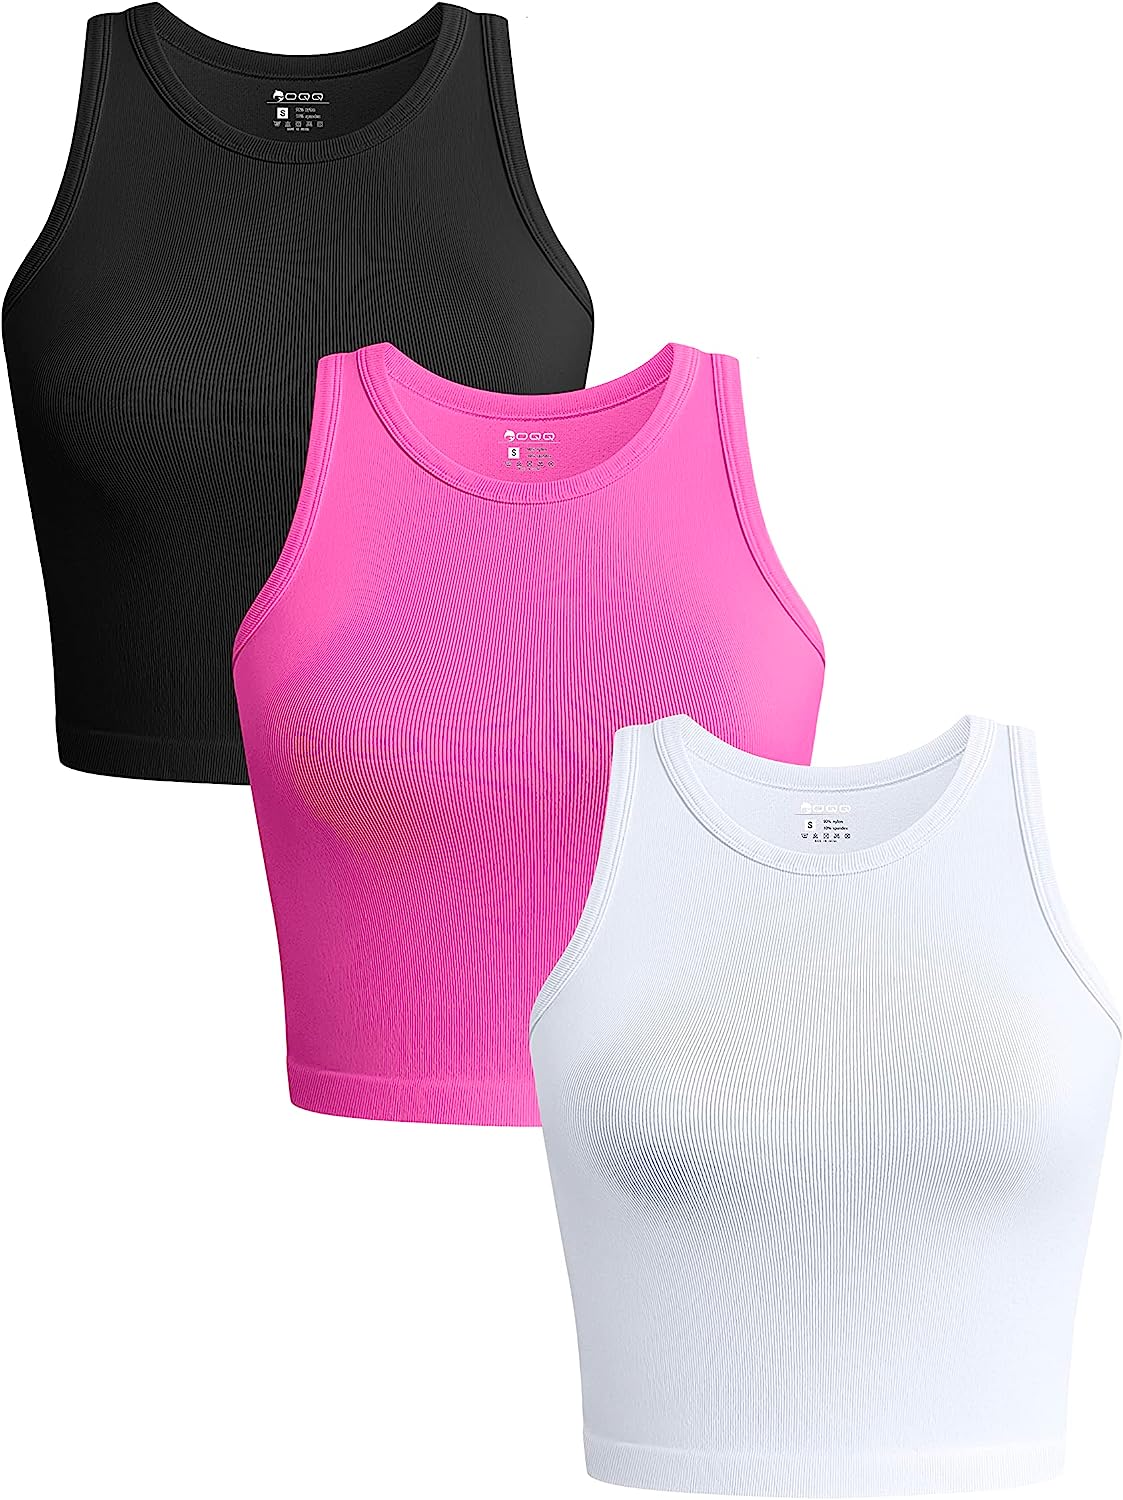 OQQ Women's 3 Piece Tank Tops Ribbed Seamless Workout Exercise